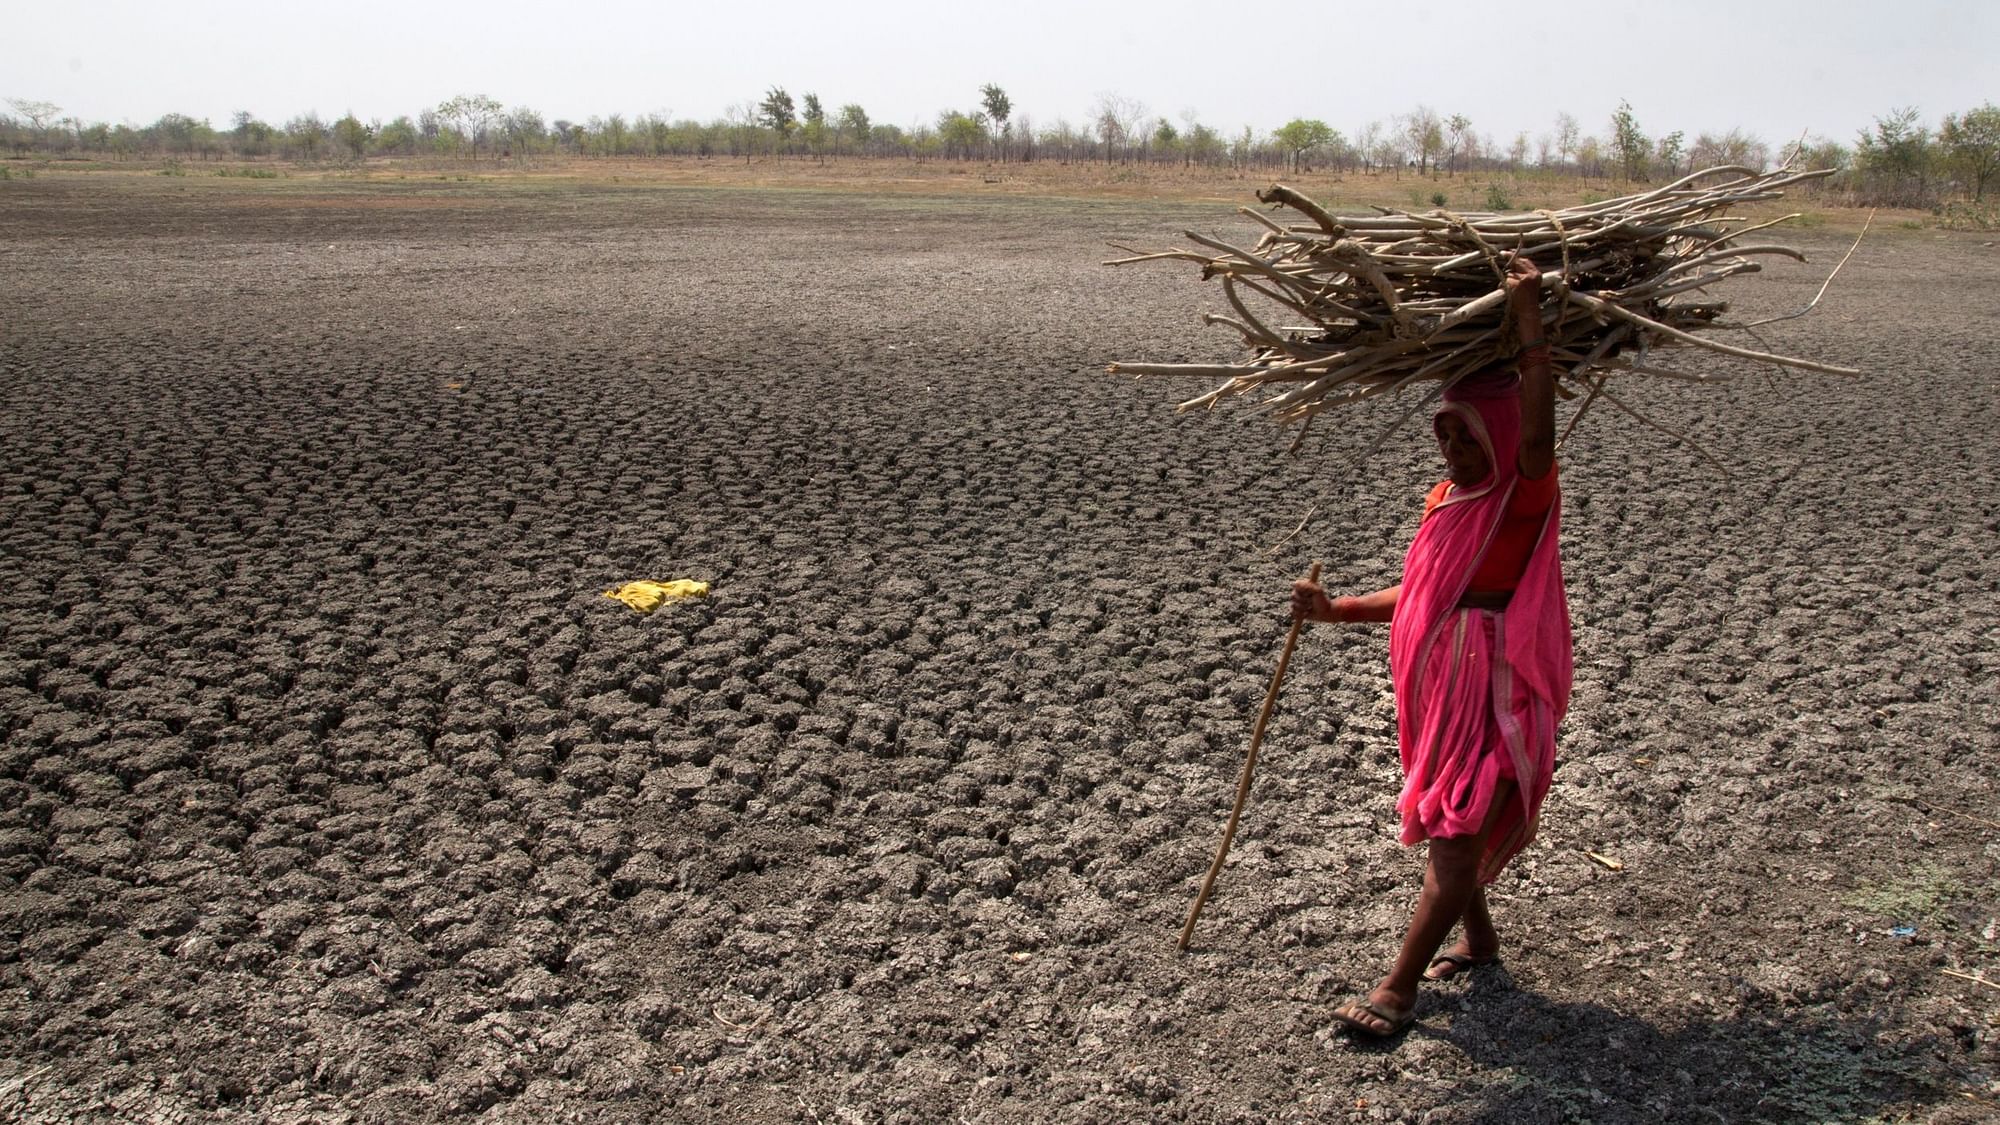 Maharashtra Chief Minister says drought is the biggest challenge for the state in 2019.